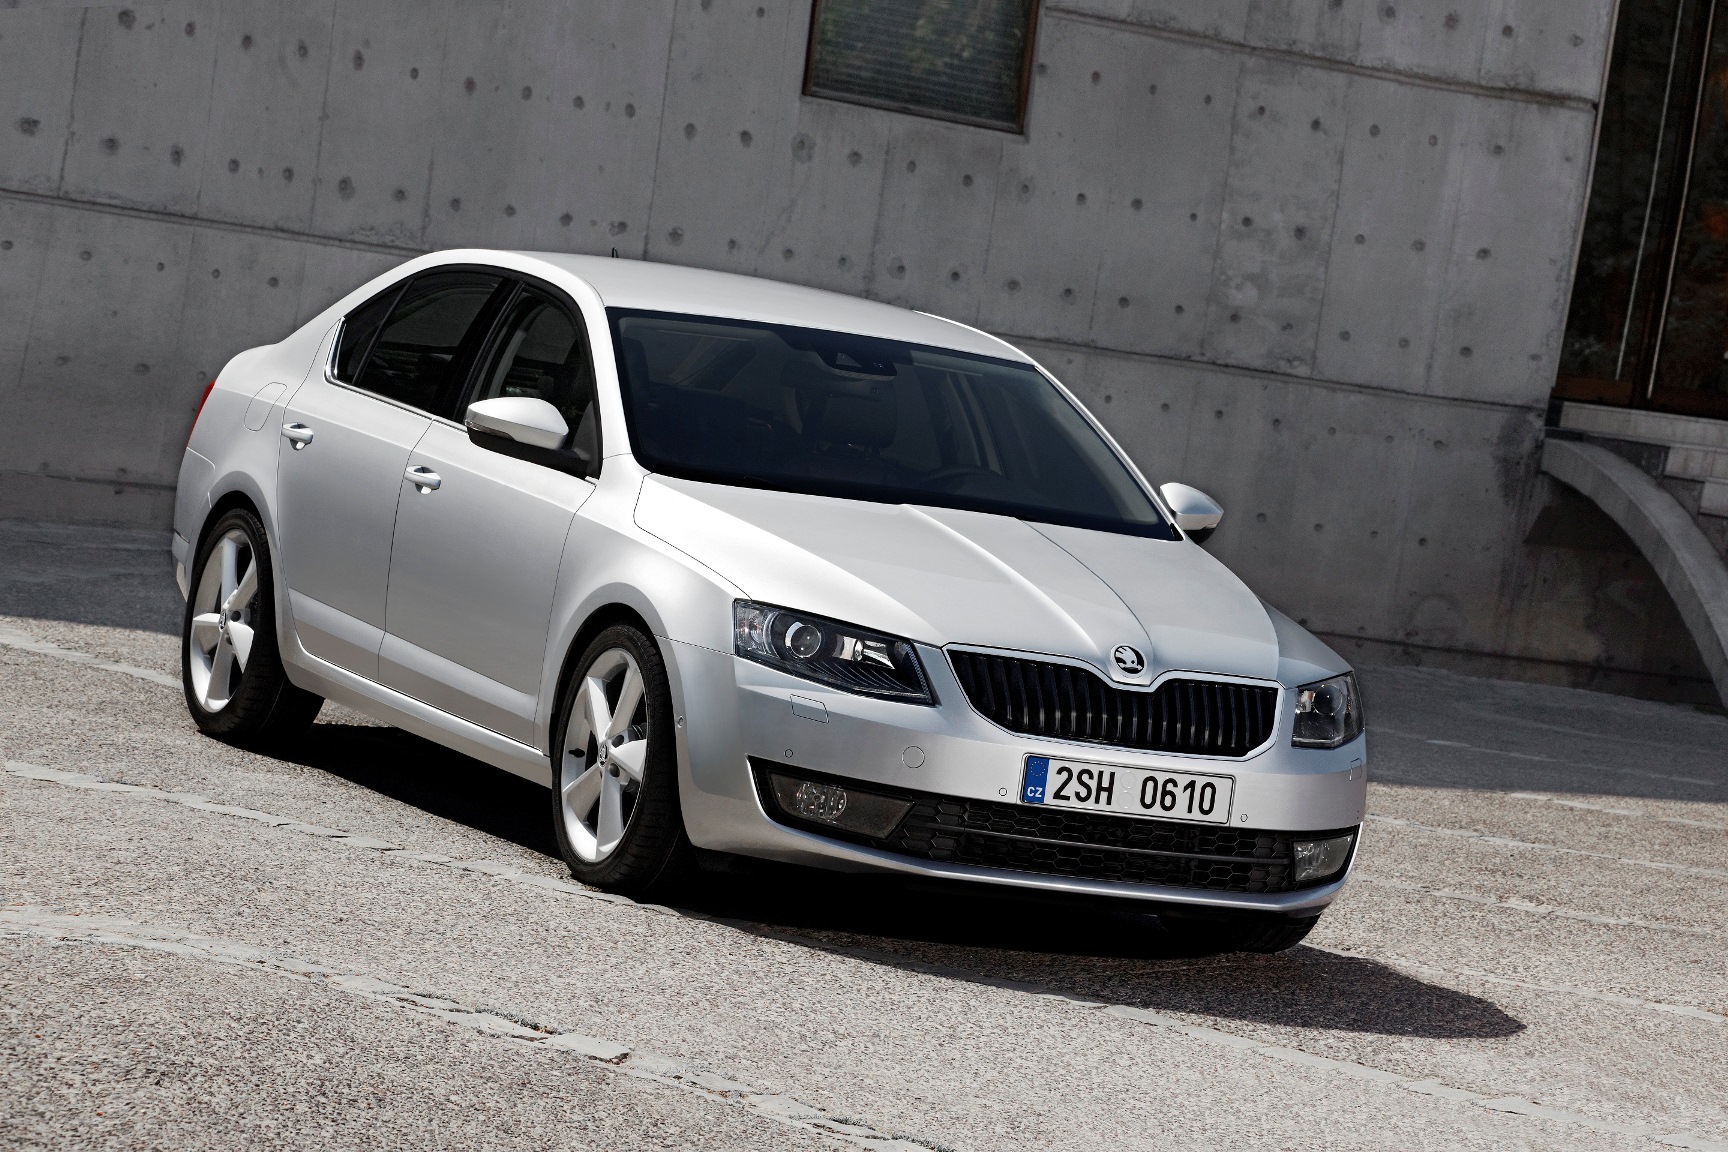 Cars for new parents buying guide: Skoda Octavia